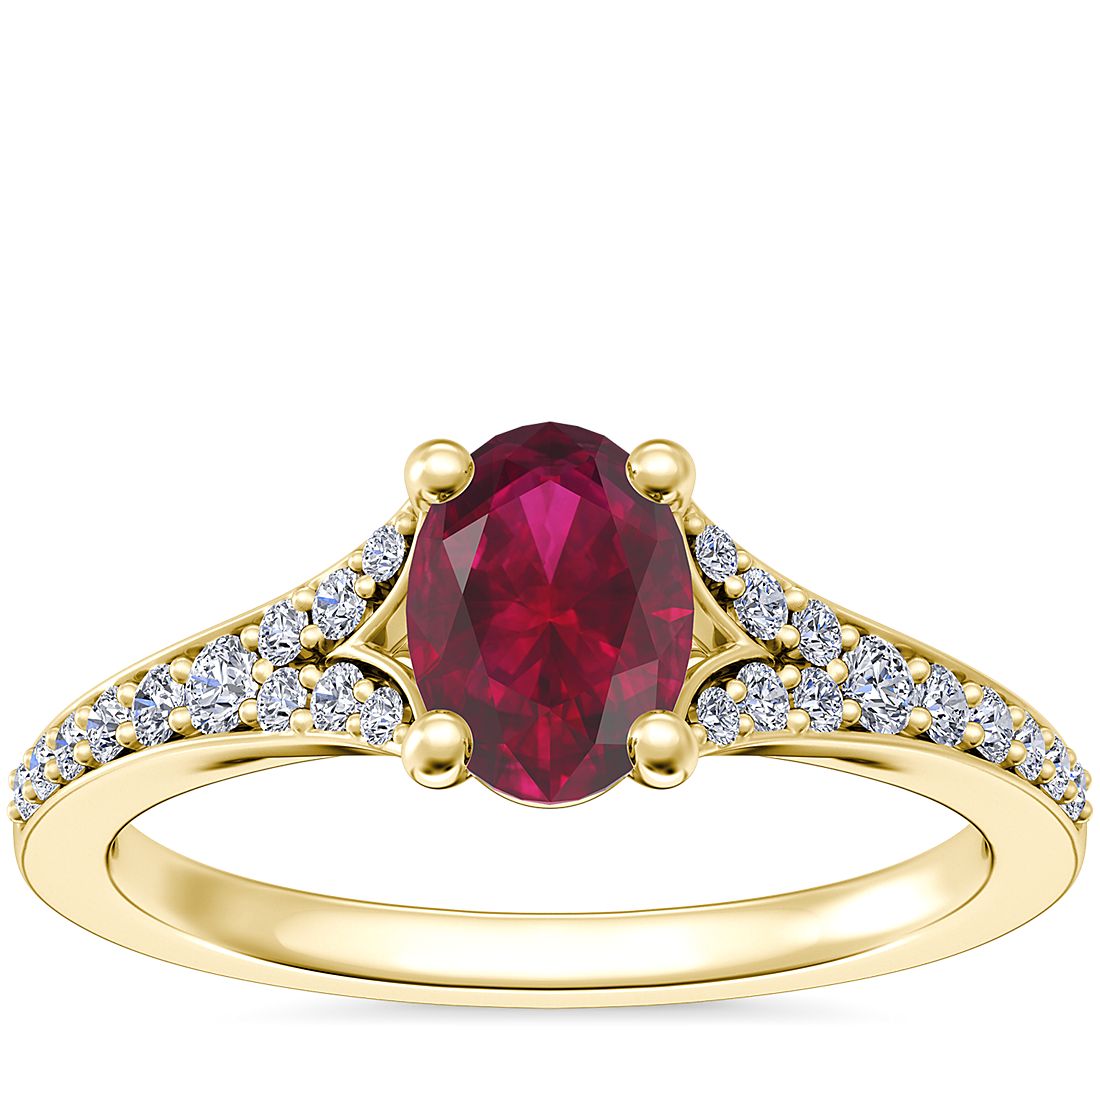 Petite Split Shank Pavé Cathedral Engagement Ring with Oval Ruby in 14k Yellow Gold (7x5mm)